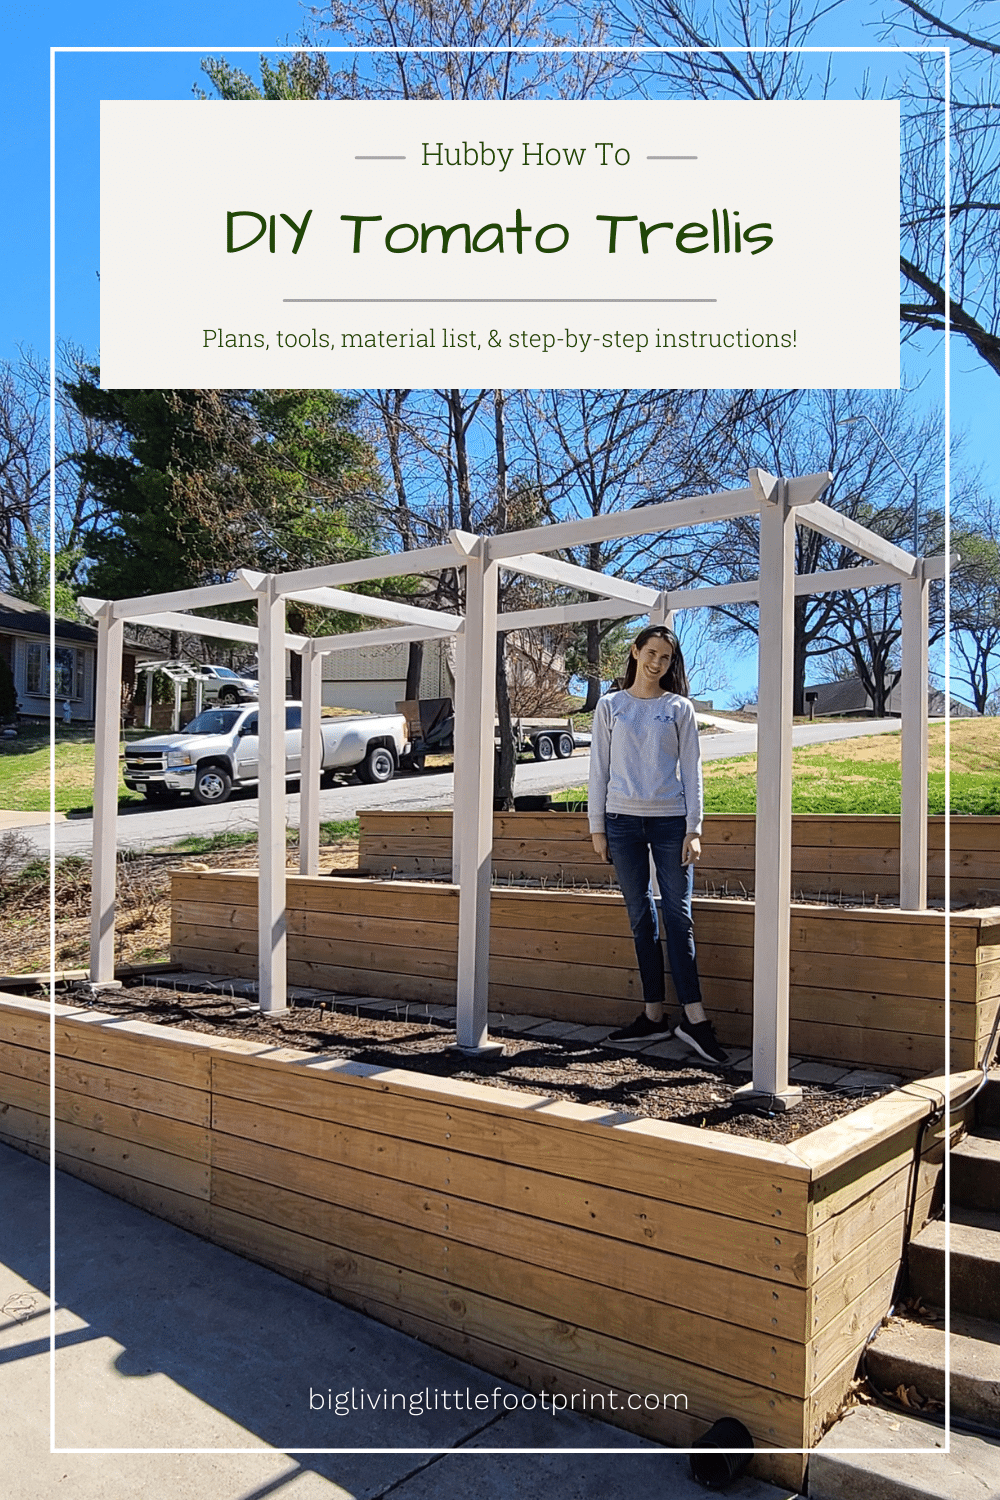 Woman standing on a terraced vegetable garden with DIY tomato trellis